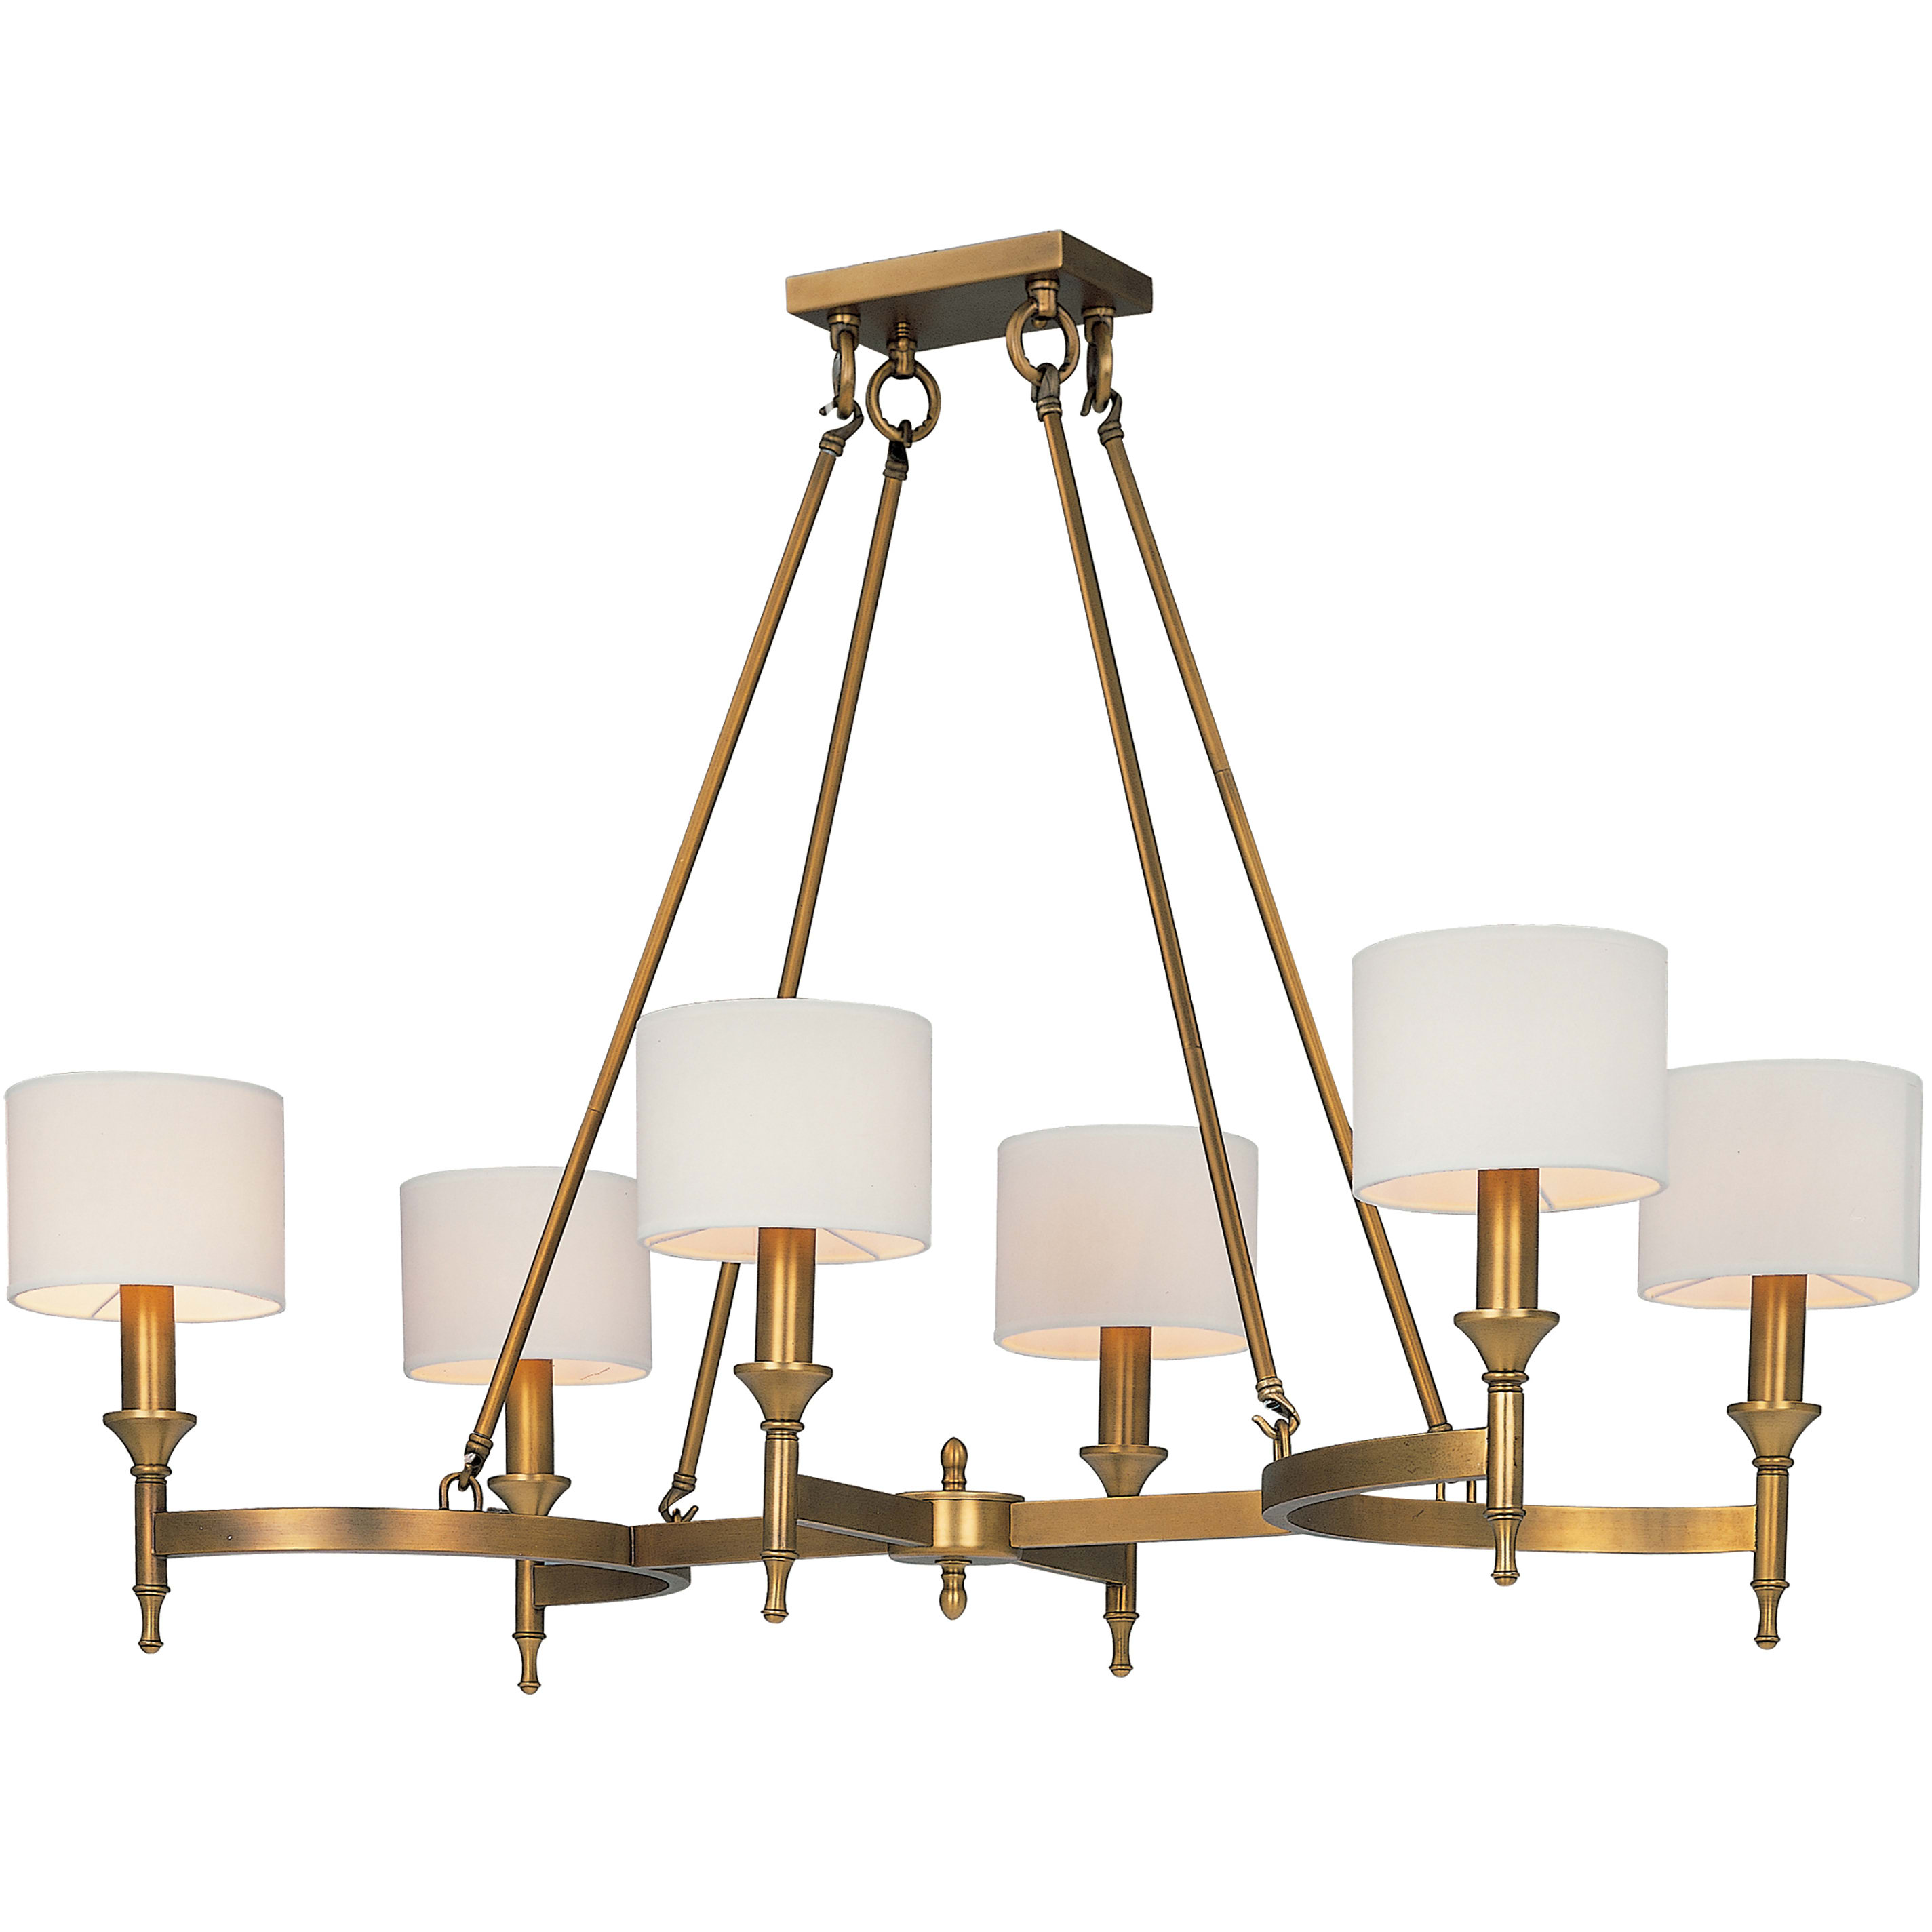 Maxim 22376omnab Aged Brass Fairmont 6, Linear Chandelier With Fabric Shades